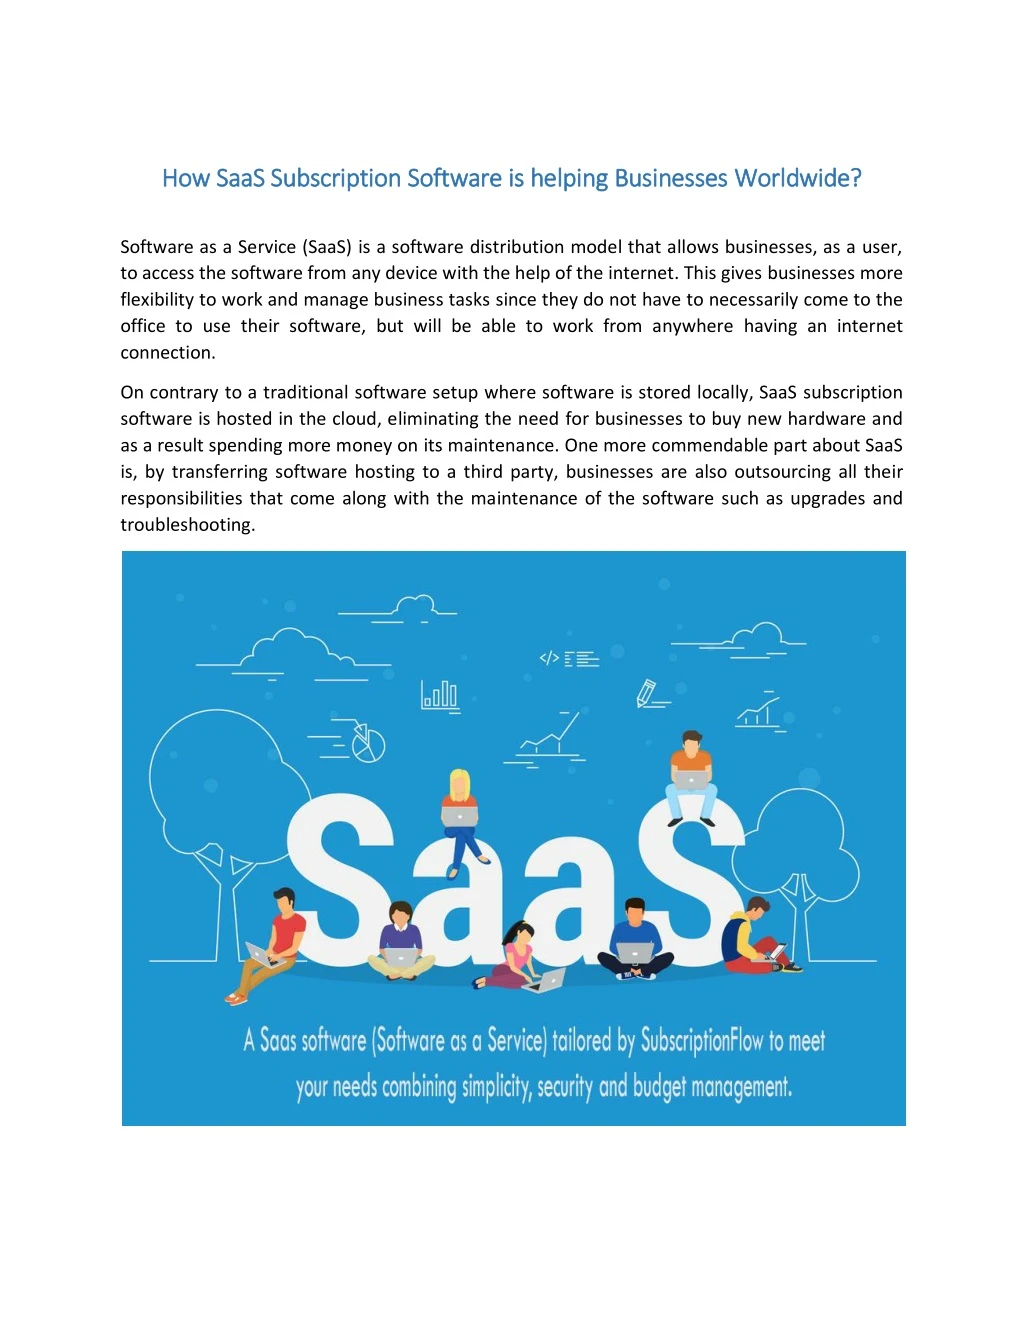 h how saas subscription s ow saas subscription